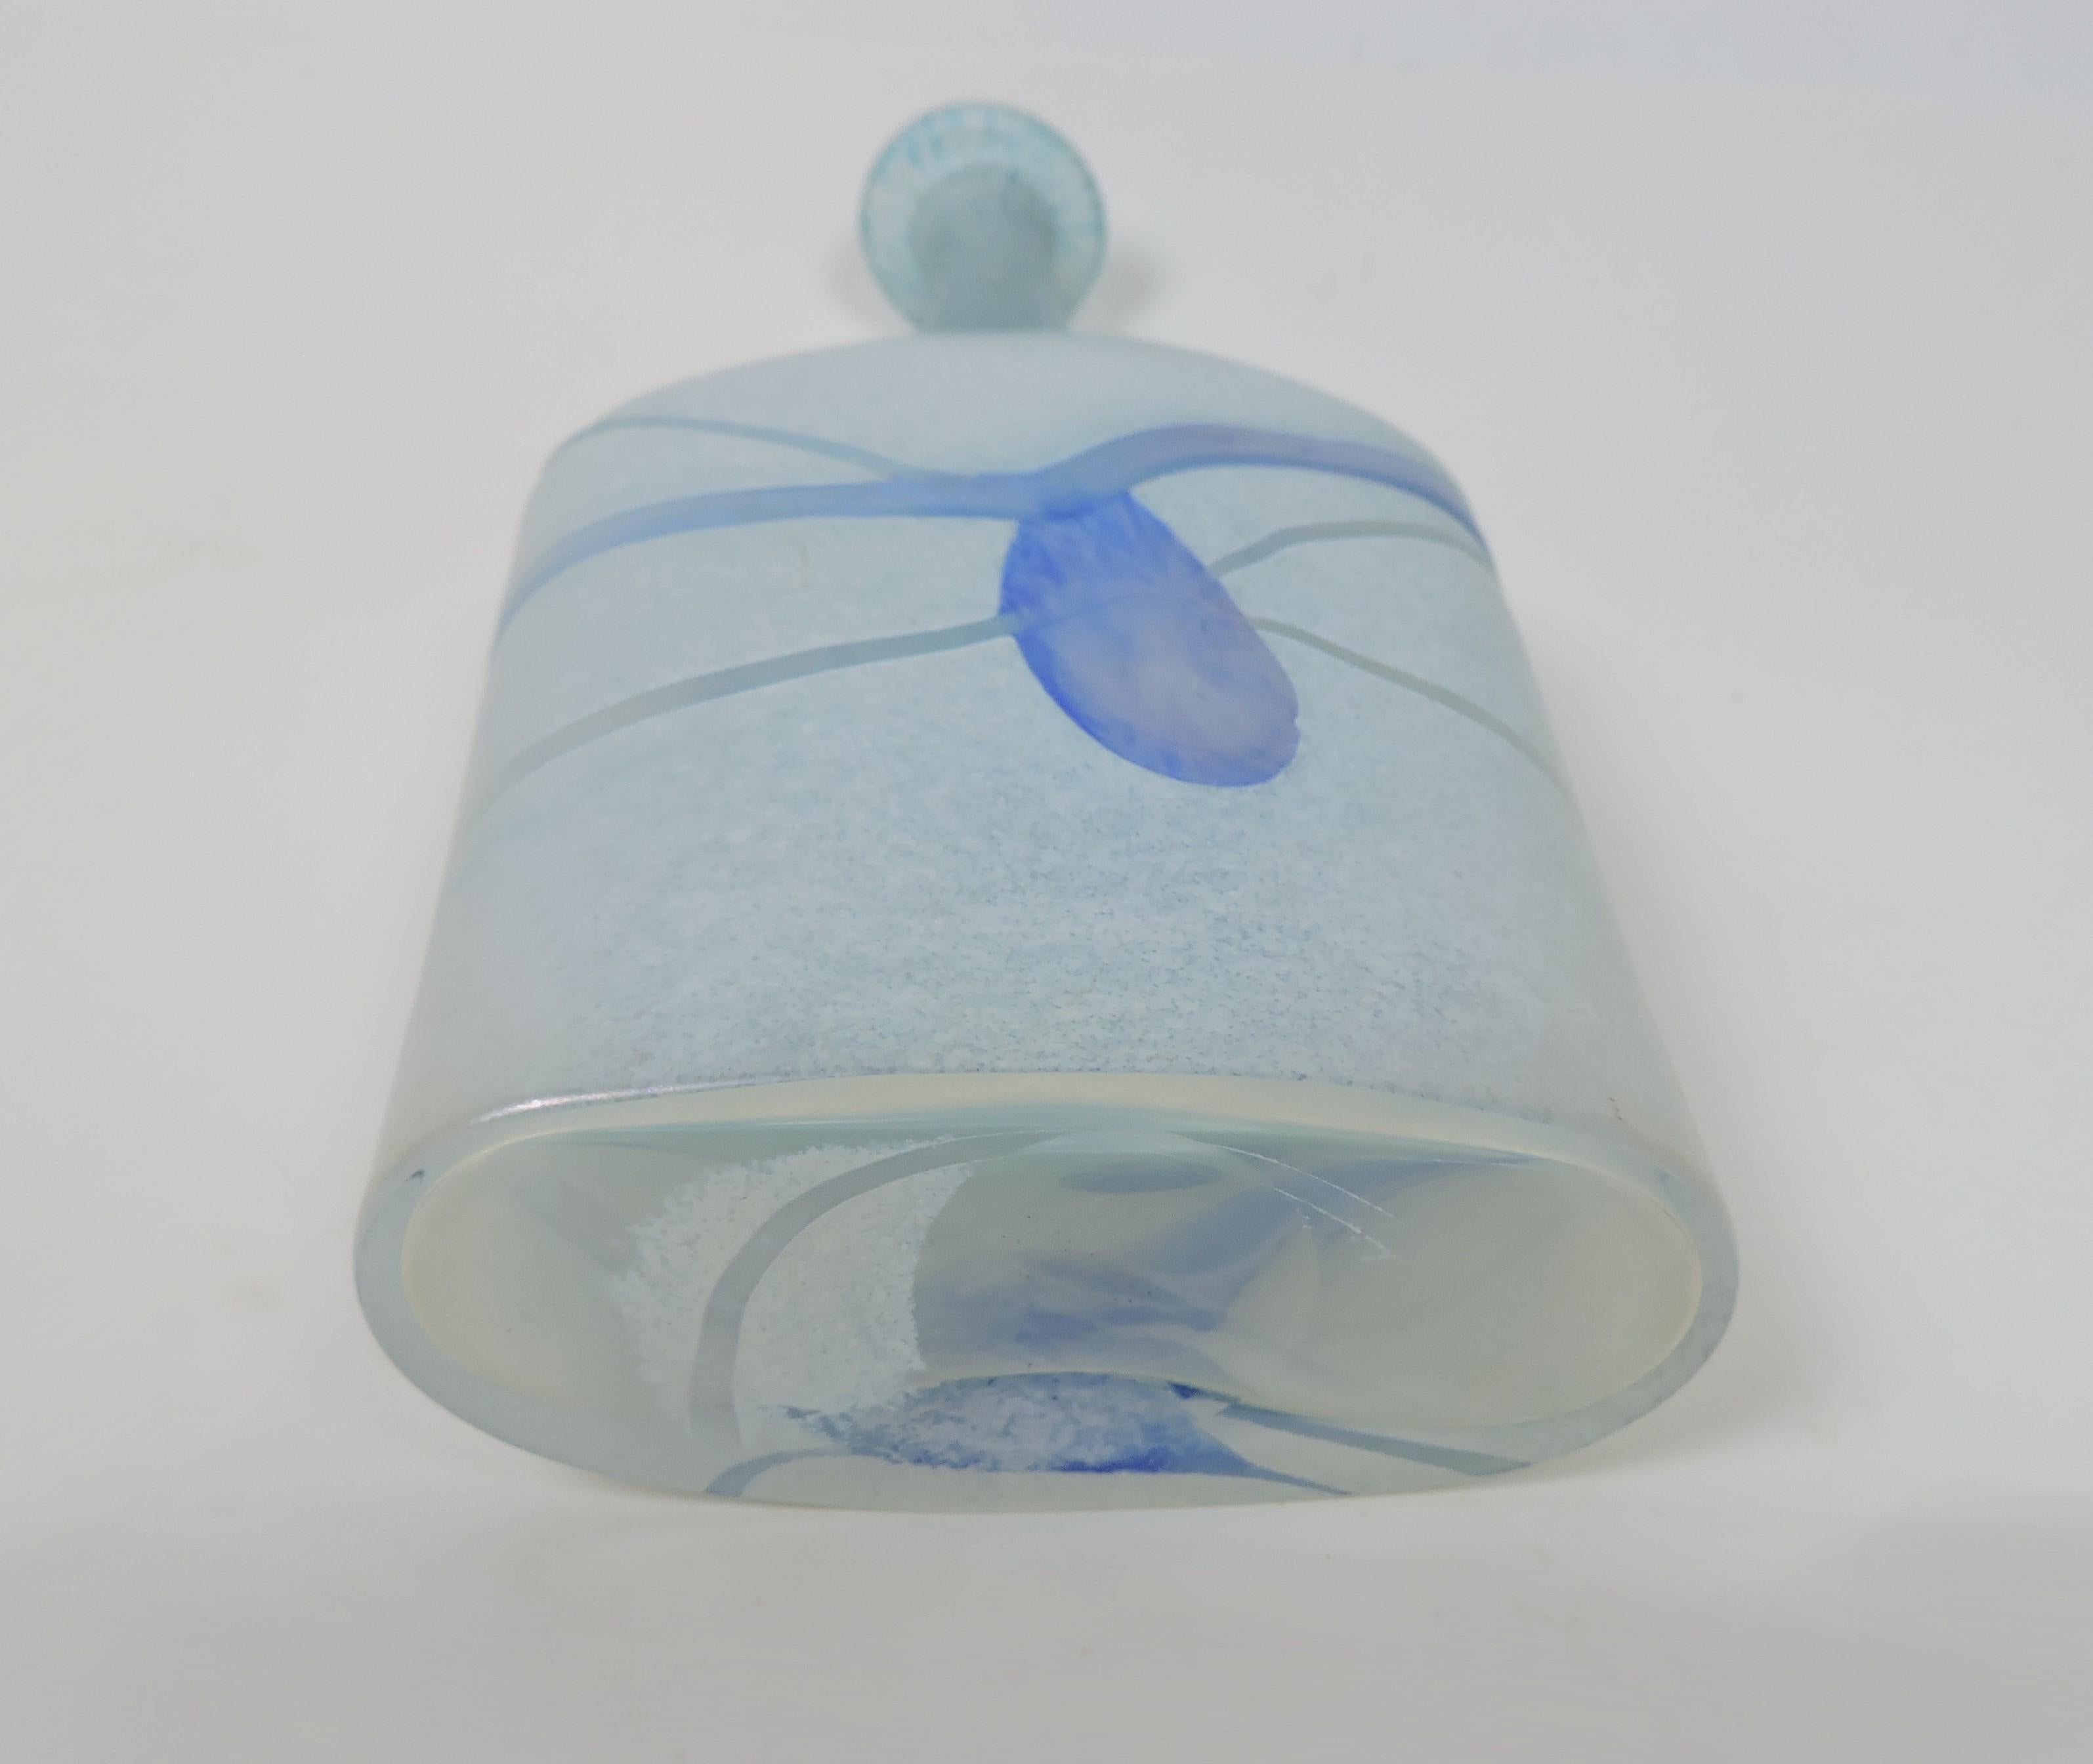 Late 20th Century Bertil Vallien Kosta Boda Glass Vase Galaxy Blue Series 1980s Artists Collection For Sale